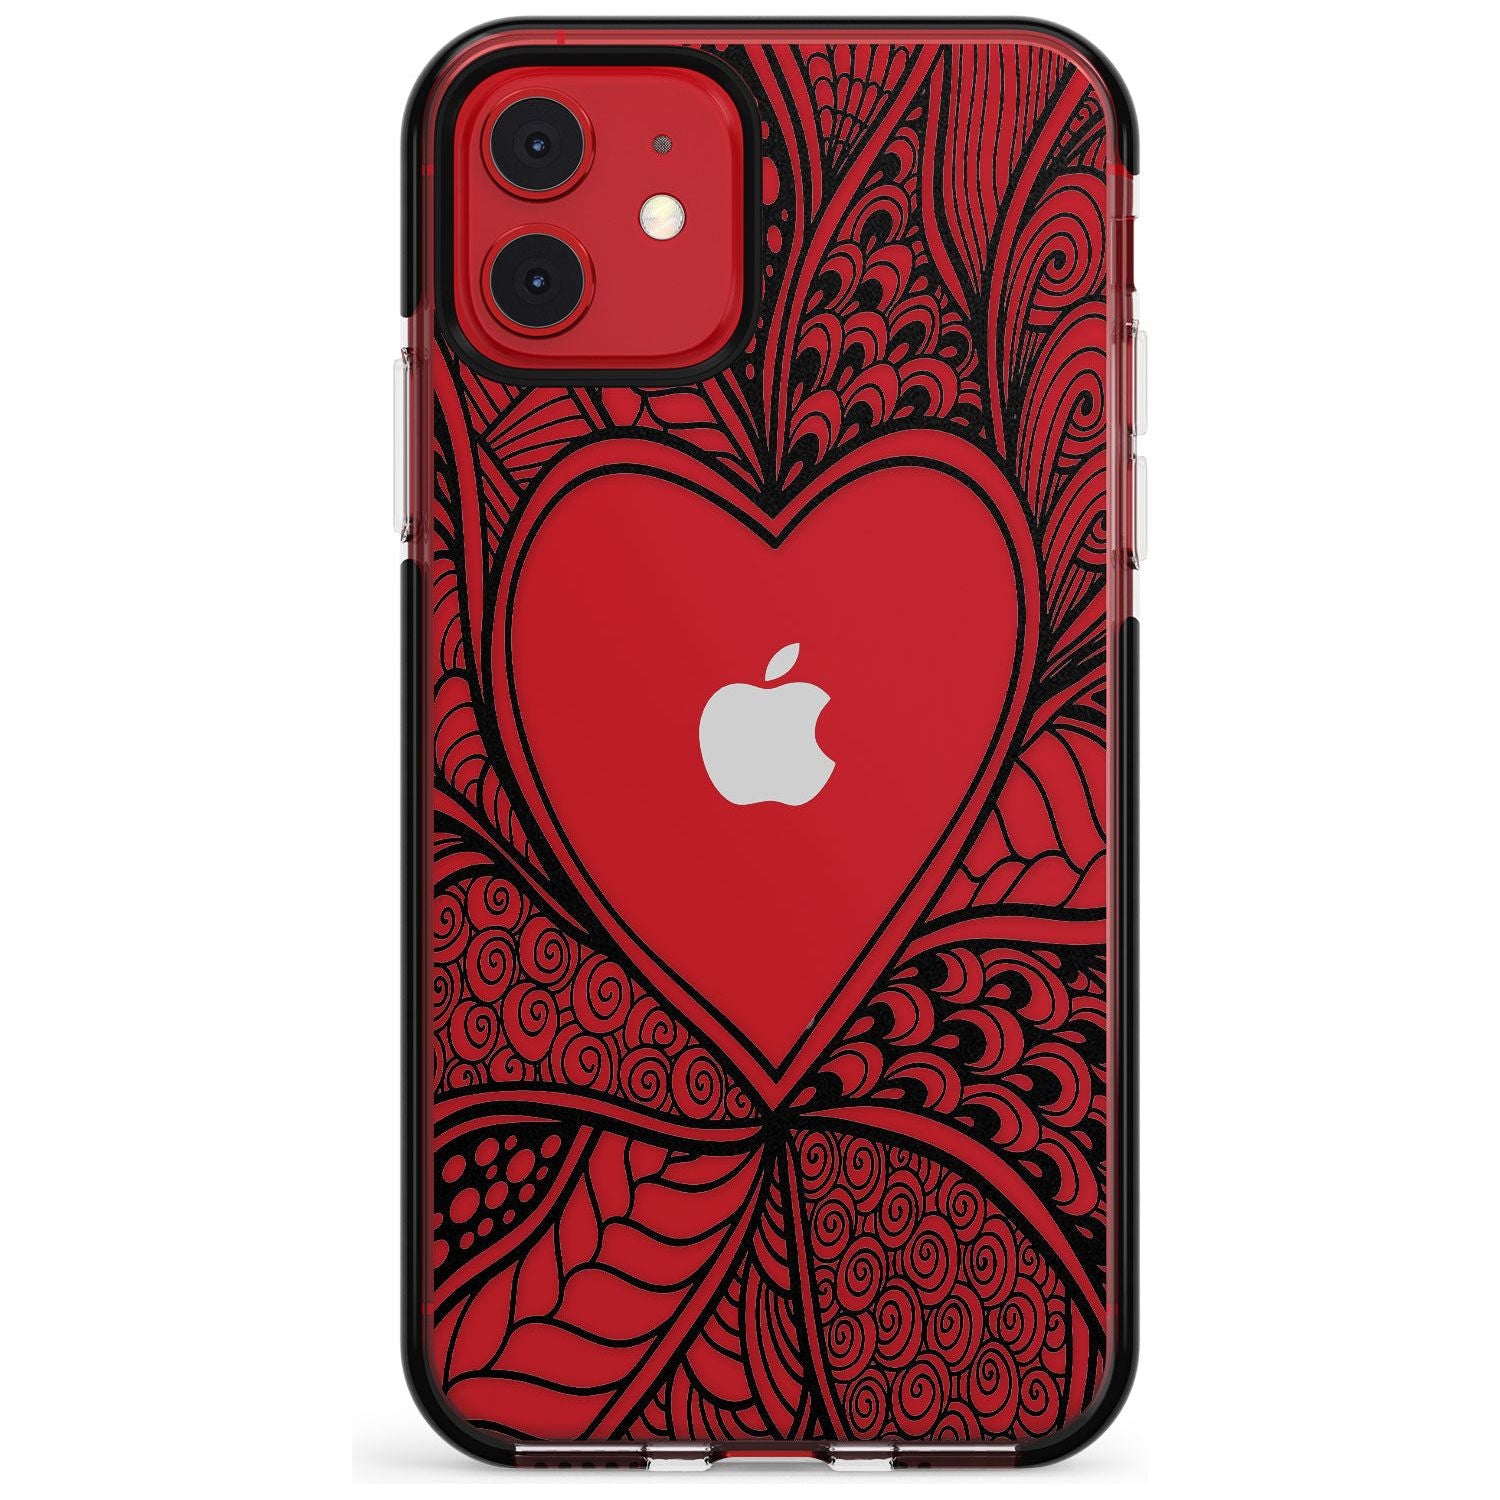 Black Henna Heart Black Impact Phone Case for iPhone 11 Pro Max